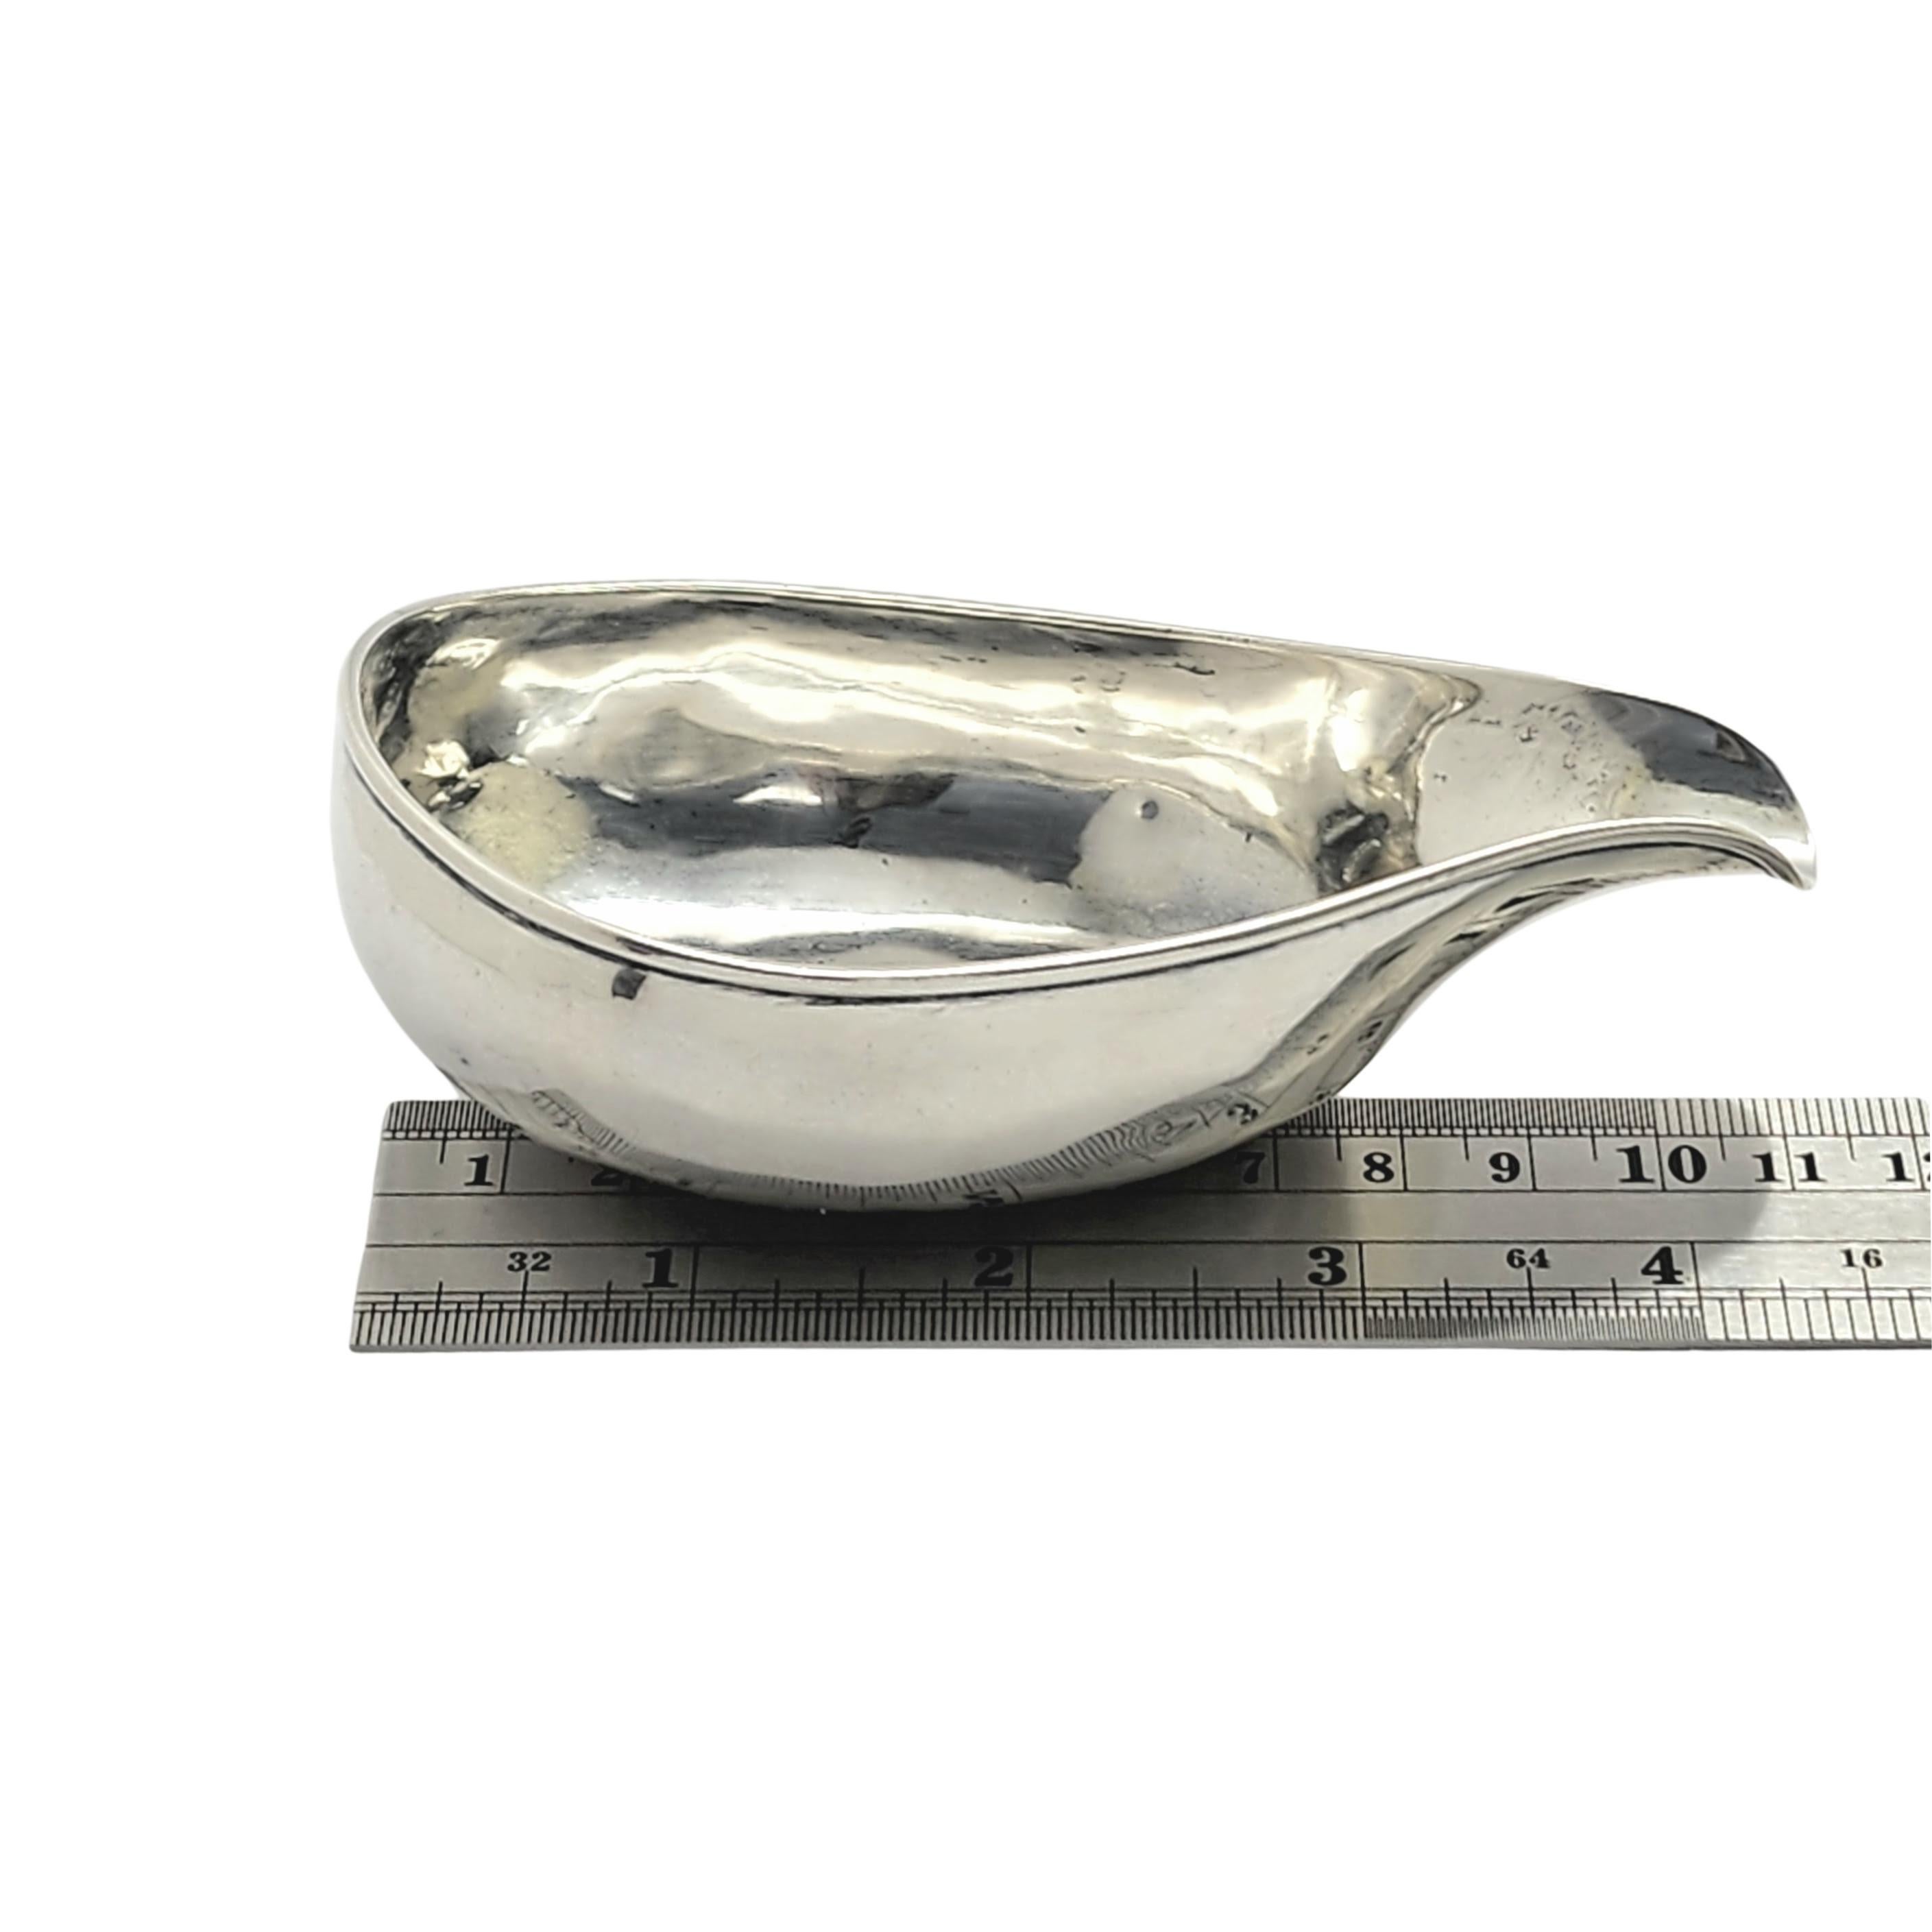 Antique English Sterling Silver Pap Boat For Sale 4